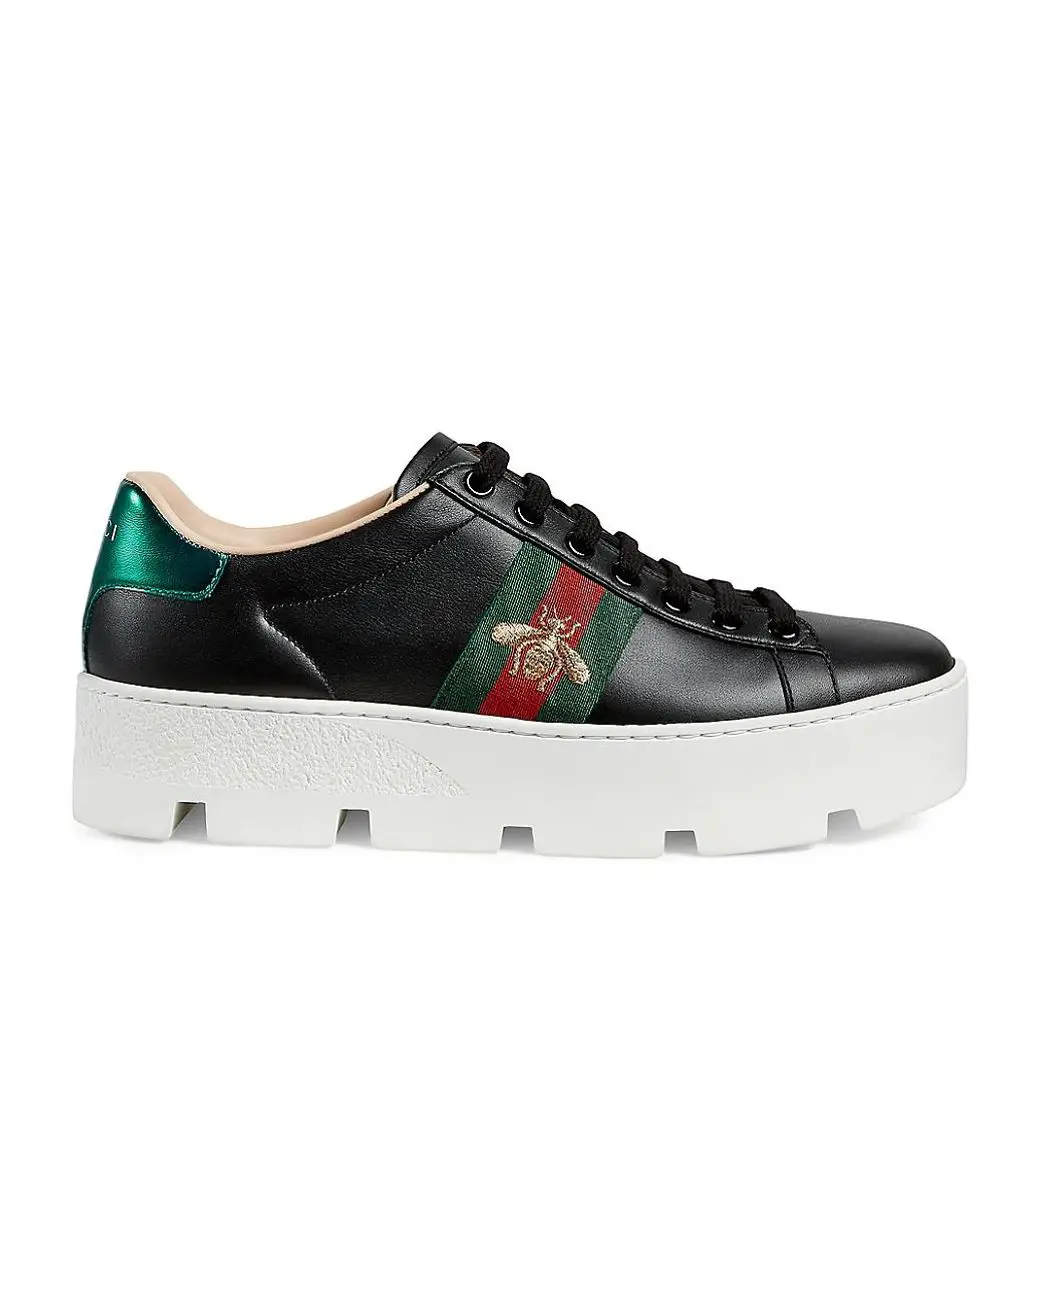 Gucci Leather New Ace Platform Bee Sneakers in Black